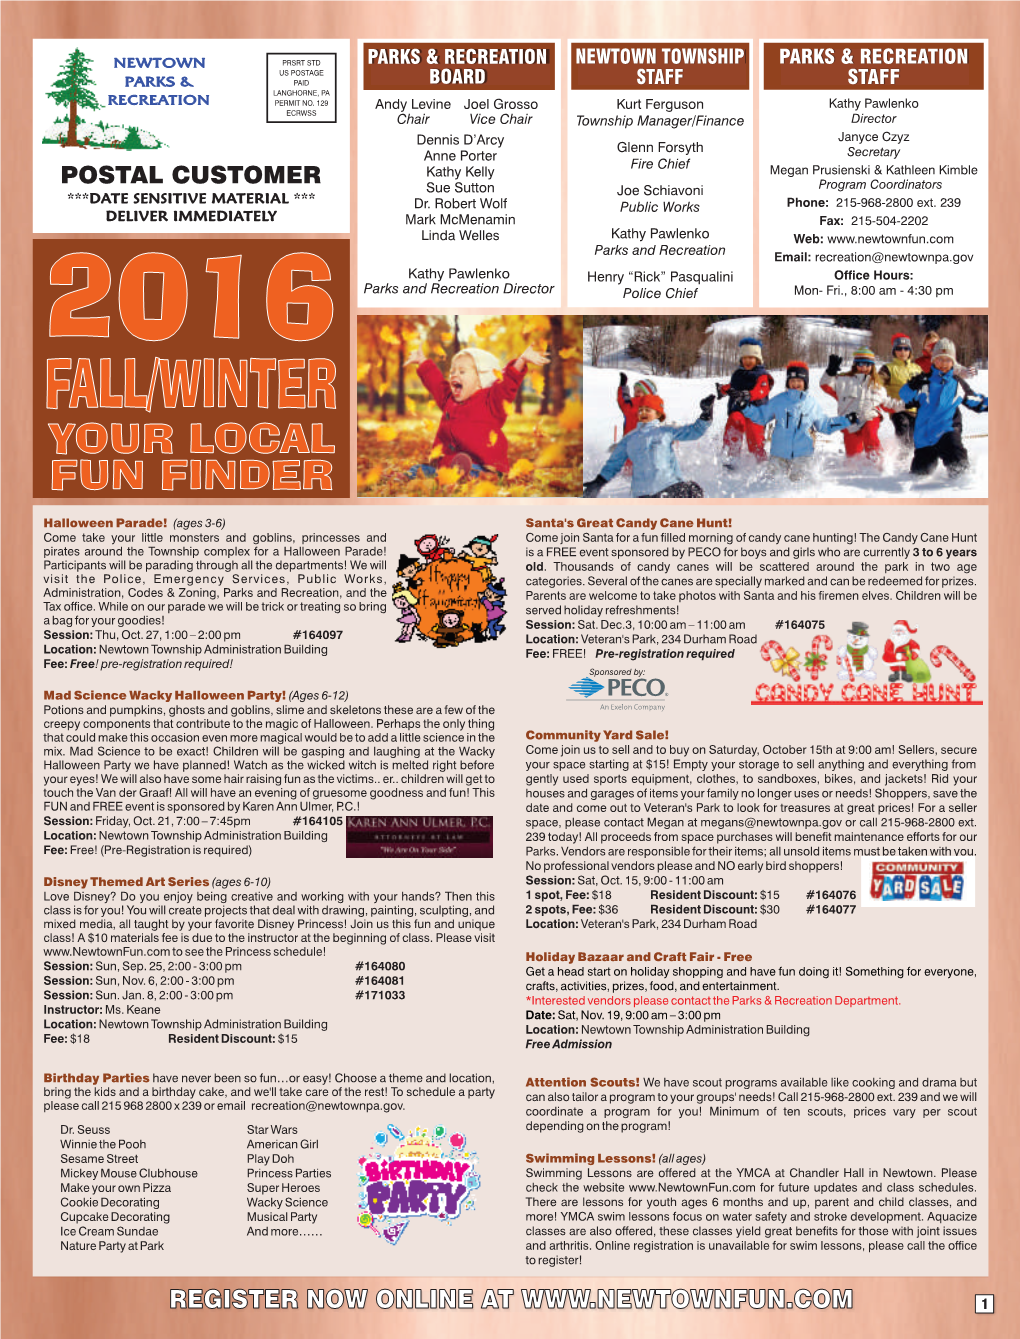 Fall/Winter Your Local Fun Finder